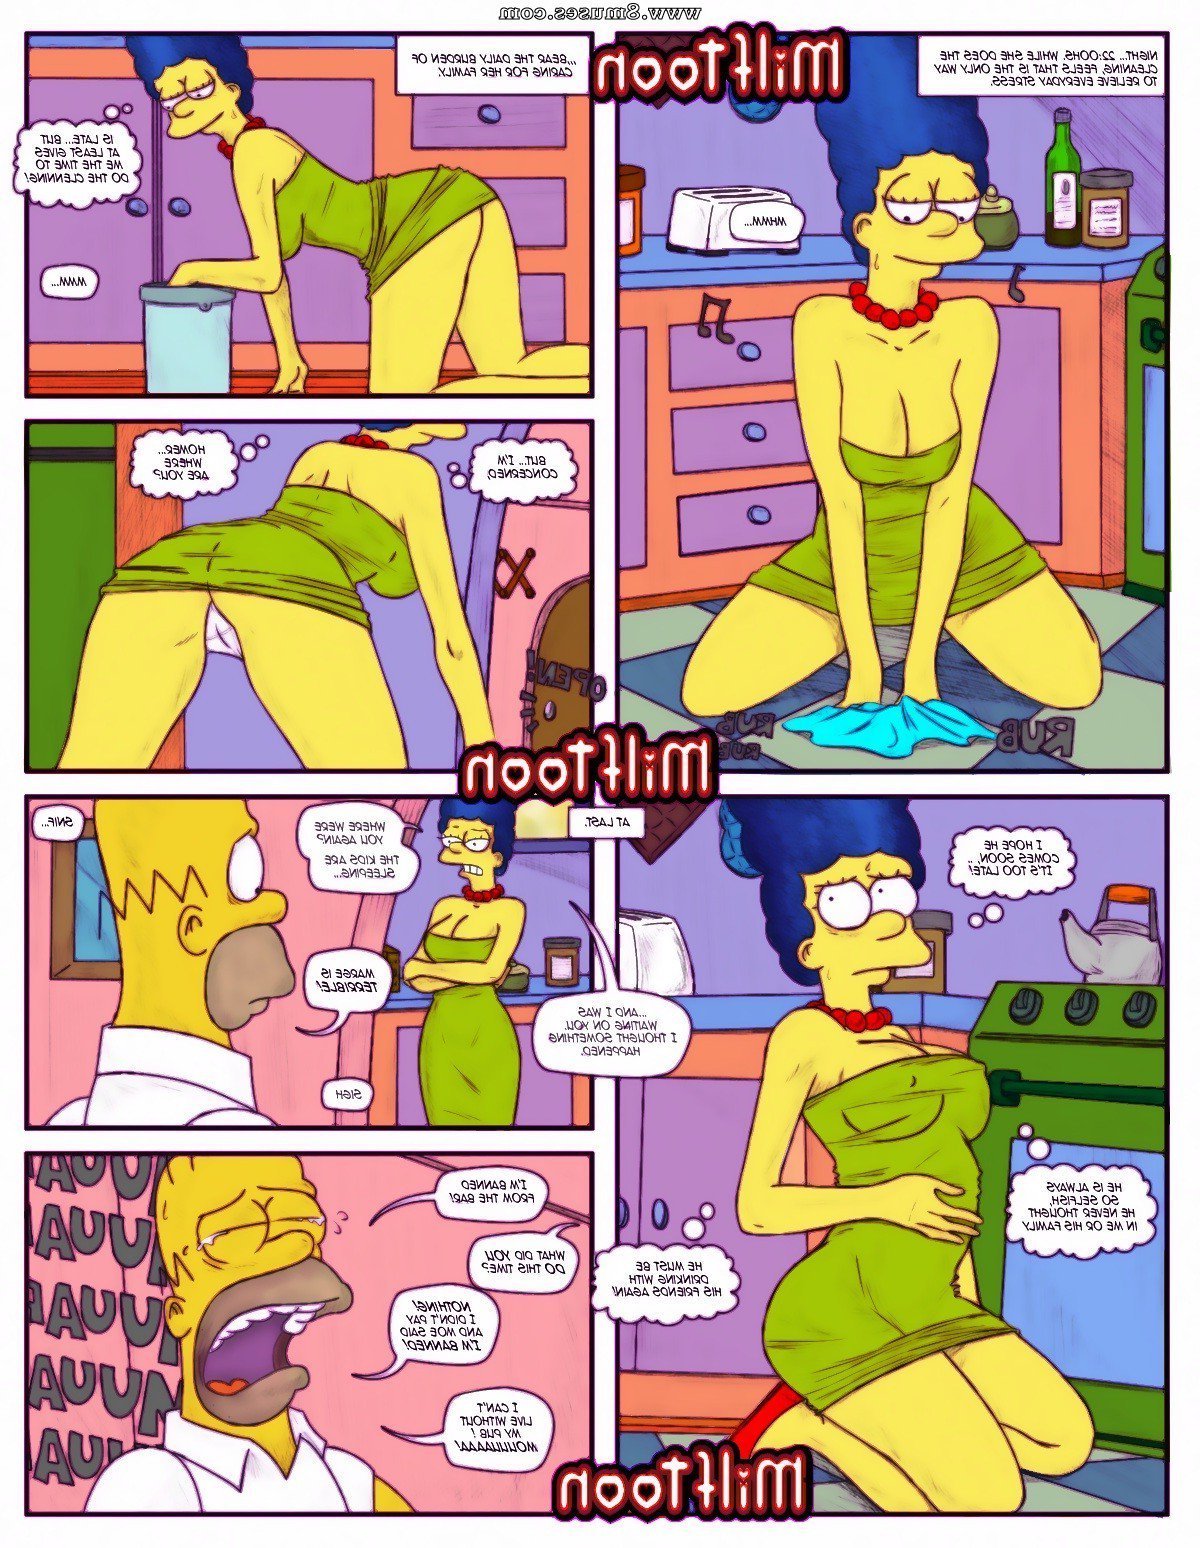 MilfToon-Comics/The-Simpsons/Issue-1 The_Simpsons_-_Issue_1.jpg